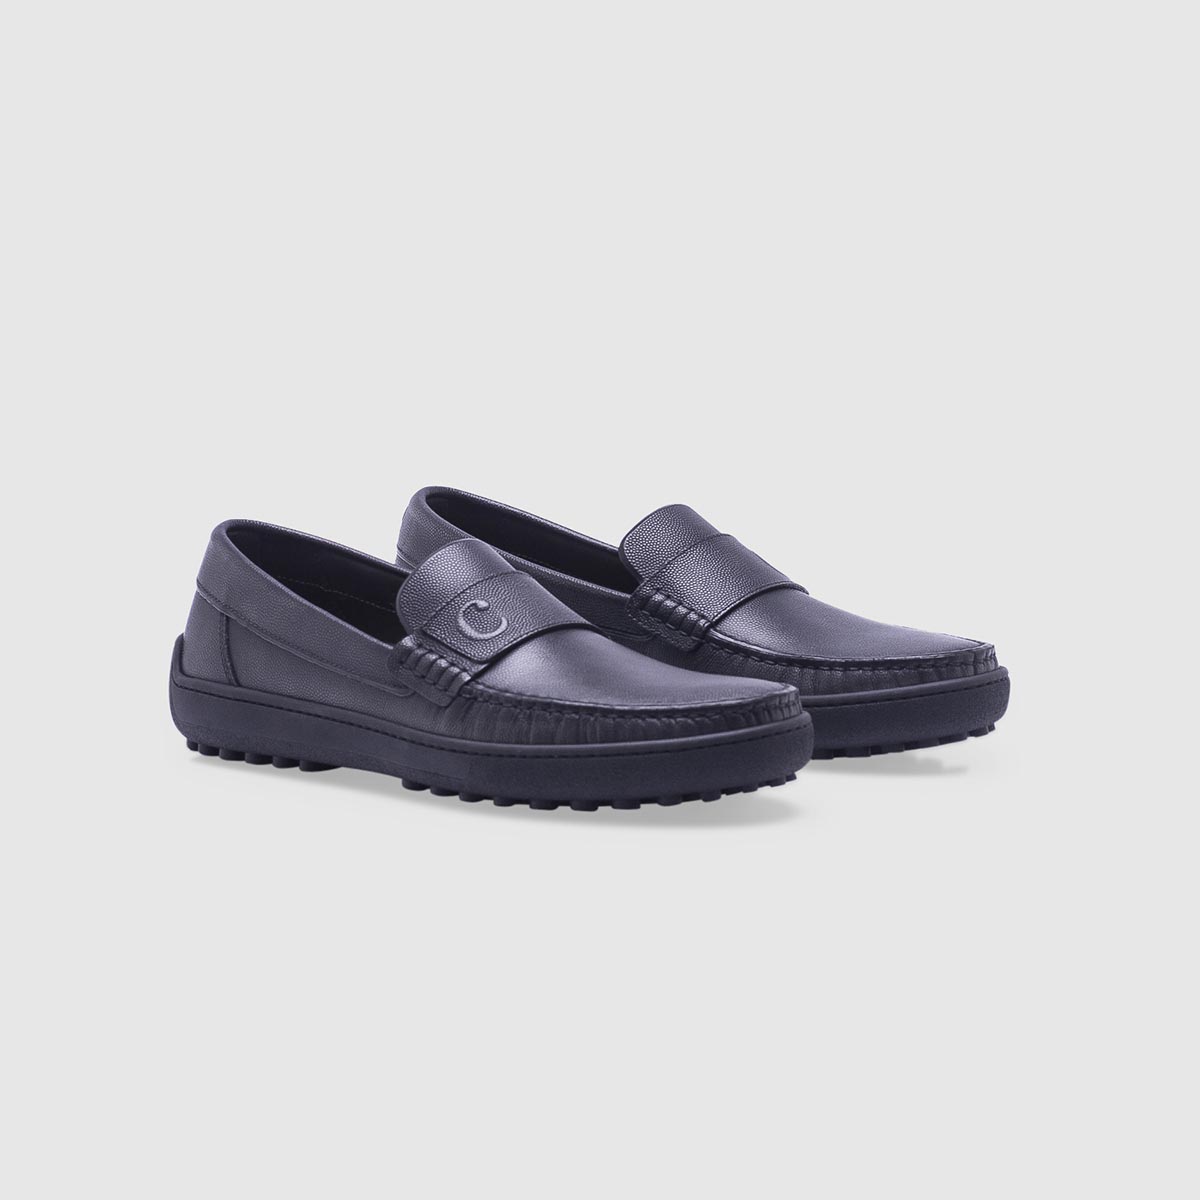 Grey loafer in tumbled calf leather Calò on sale 2022 2